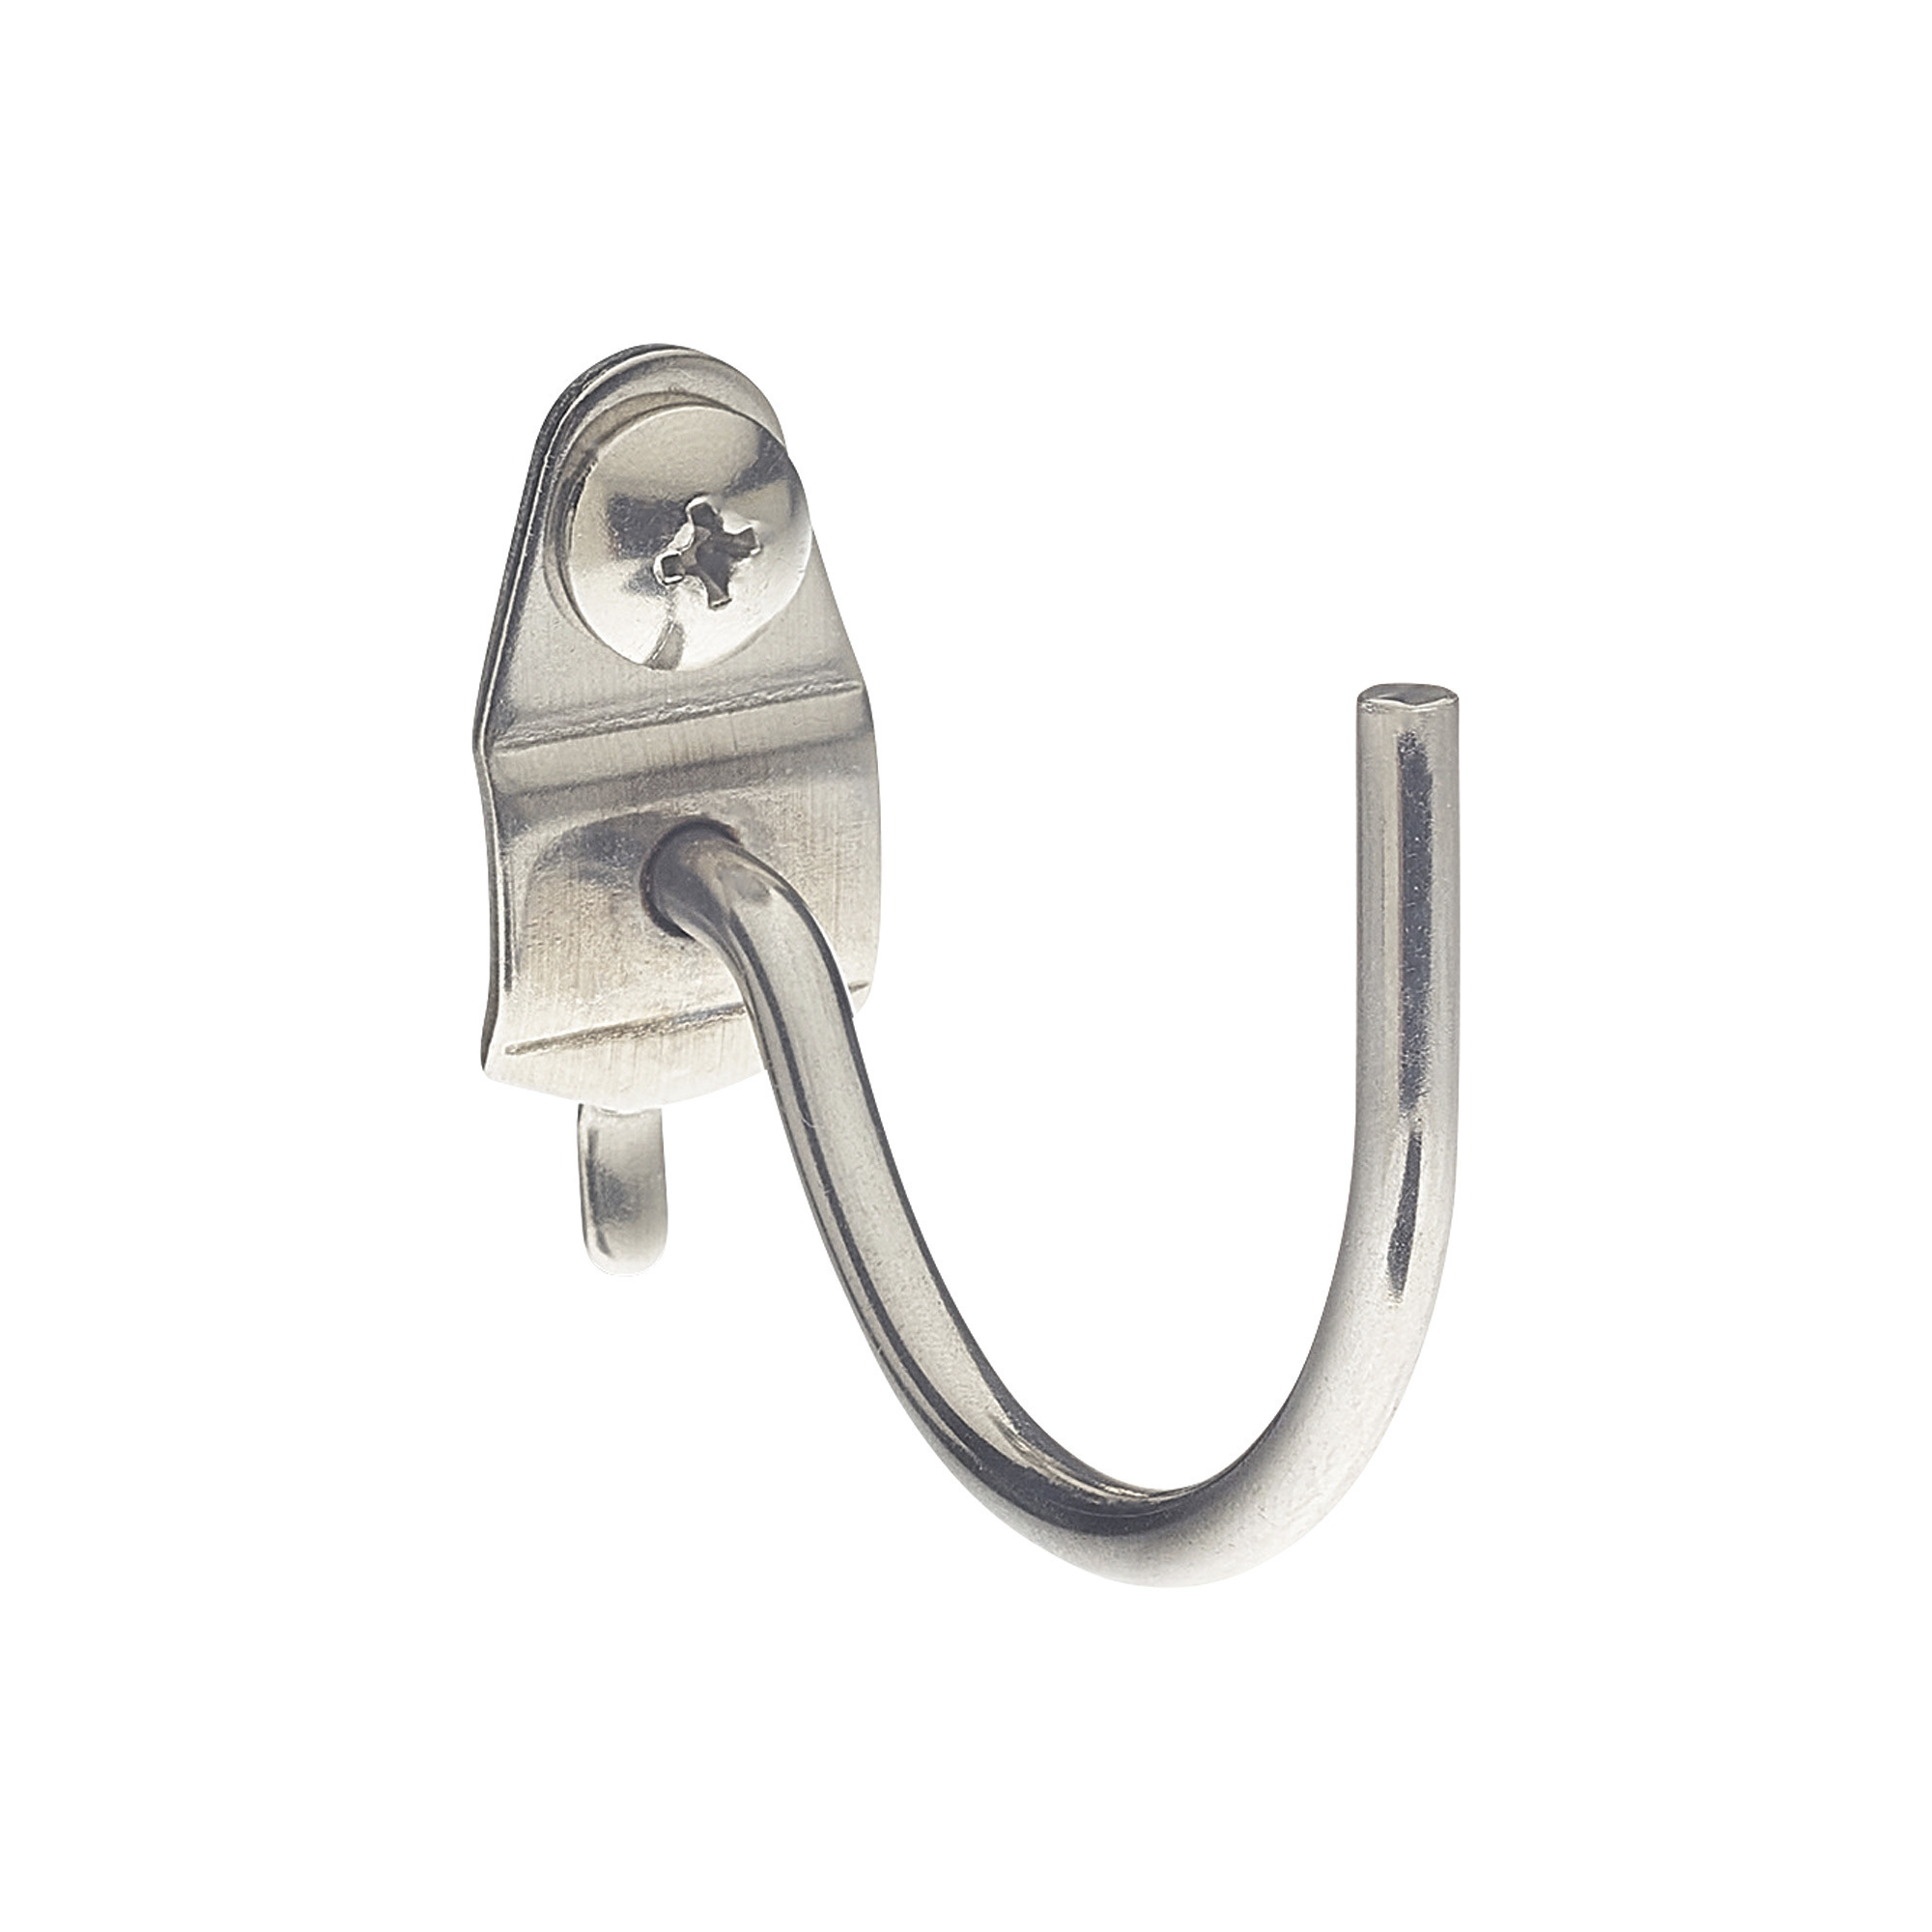 Triton Products DuraHook 2 1/4in. Curved Stainless Single Rod